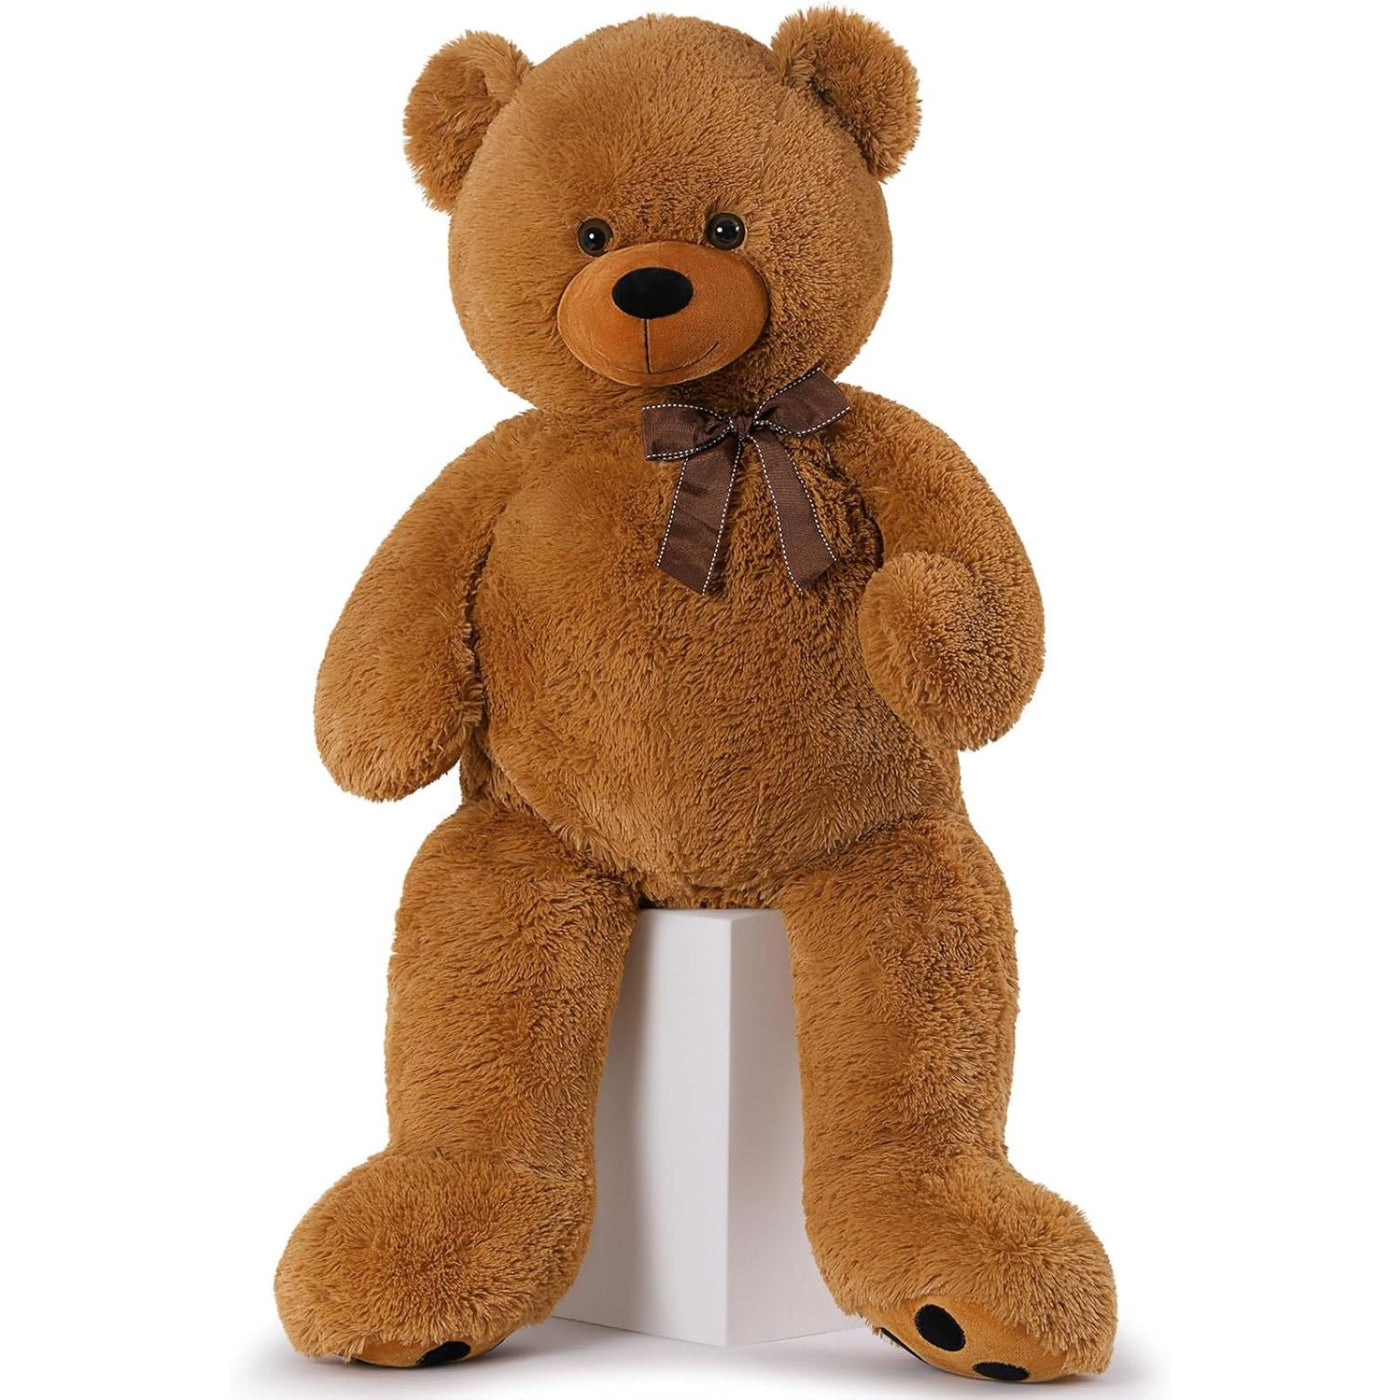 Giant Teddy Bear Soft Toy, 39 Inches